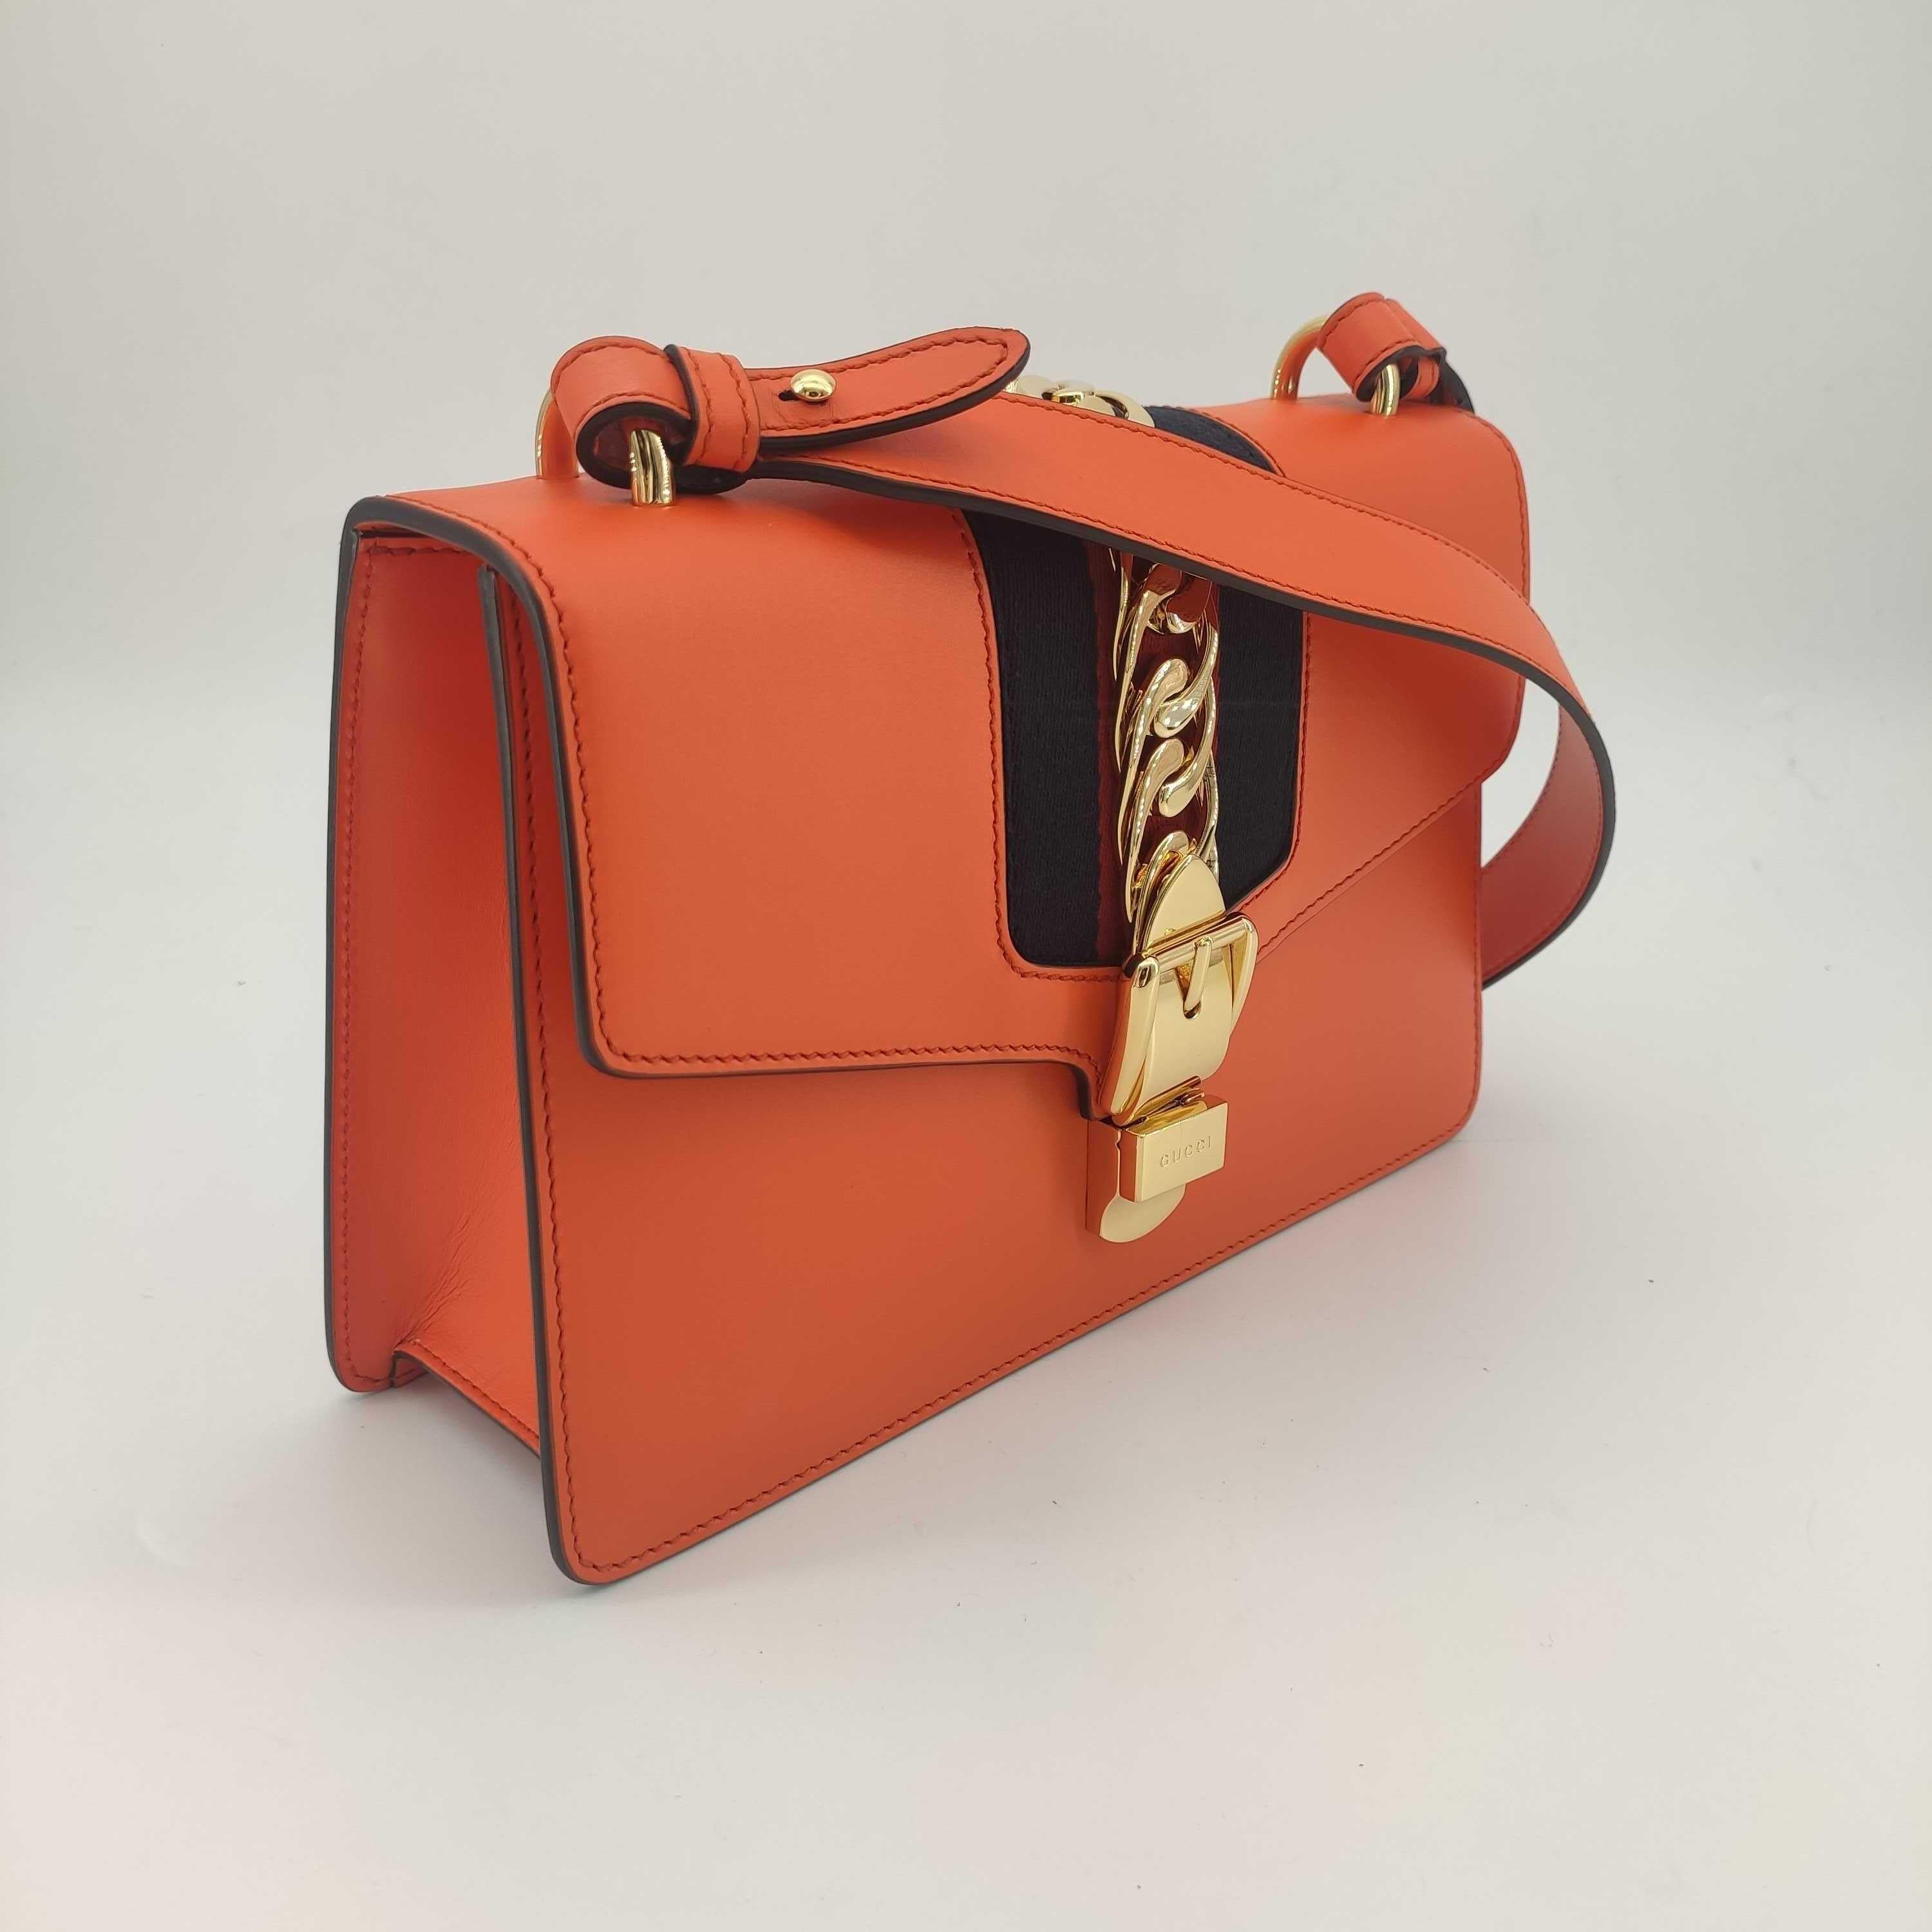 - Designer: GUCCI
- Model: Sylvie
- Condition: Very good condition. Sign of wear on base corners
- Accessories: Dustbag
- Measurements: Width: 25cm, Height: 17cm, Depth: 8cm, Strap: 73cm
- Exterior Material: Leather
- Exterior Color: Orange
-